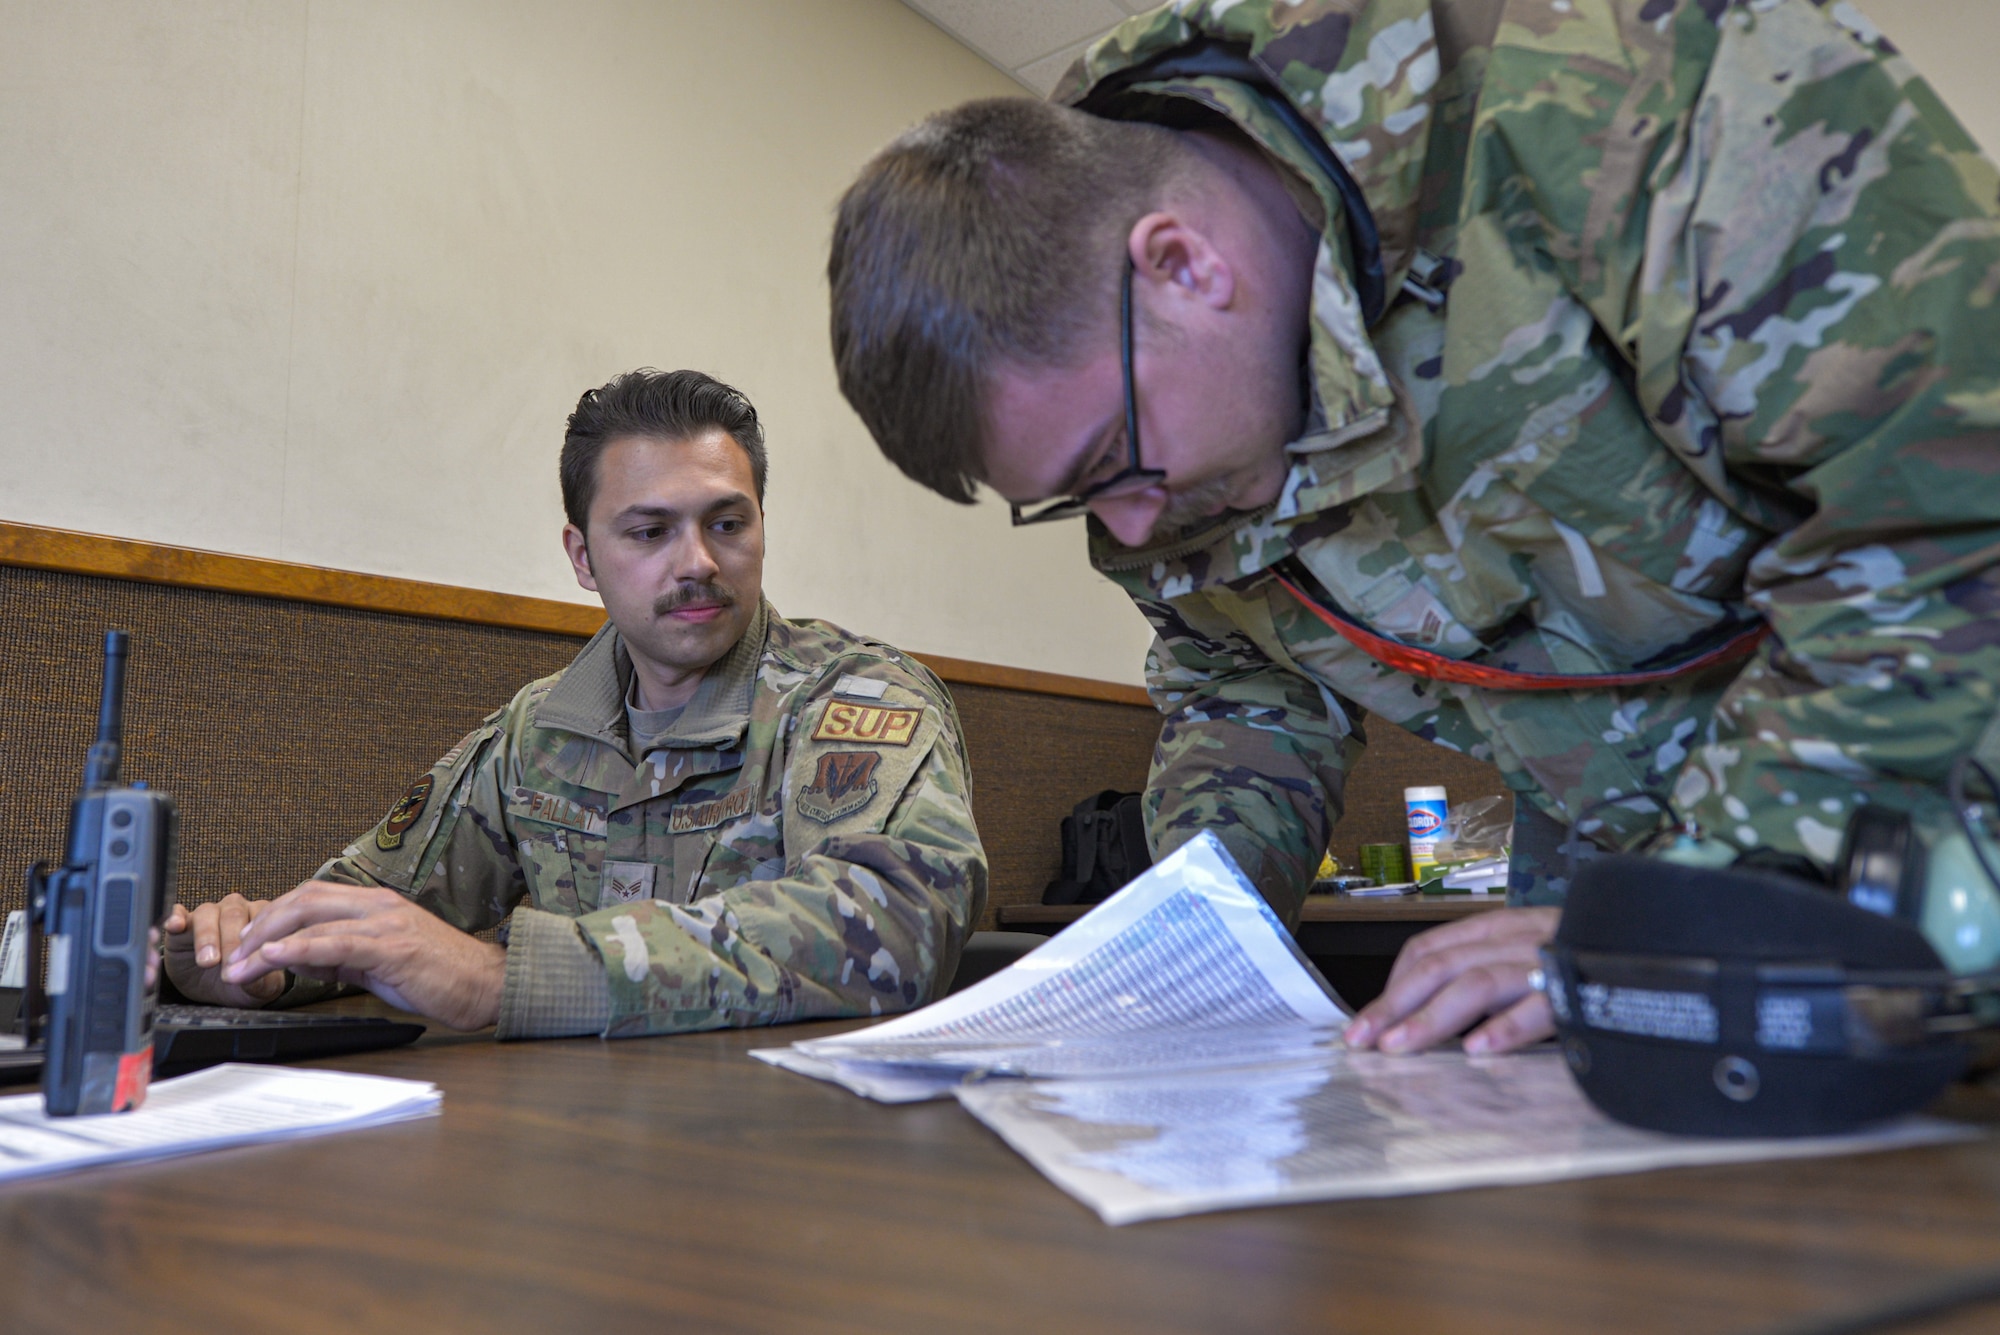 Airmen work together to locate parts.